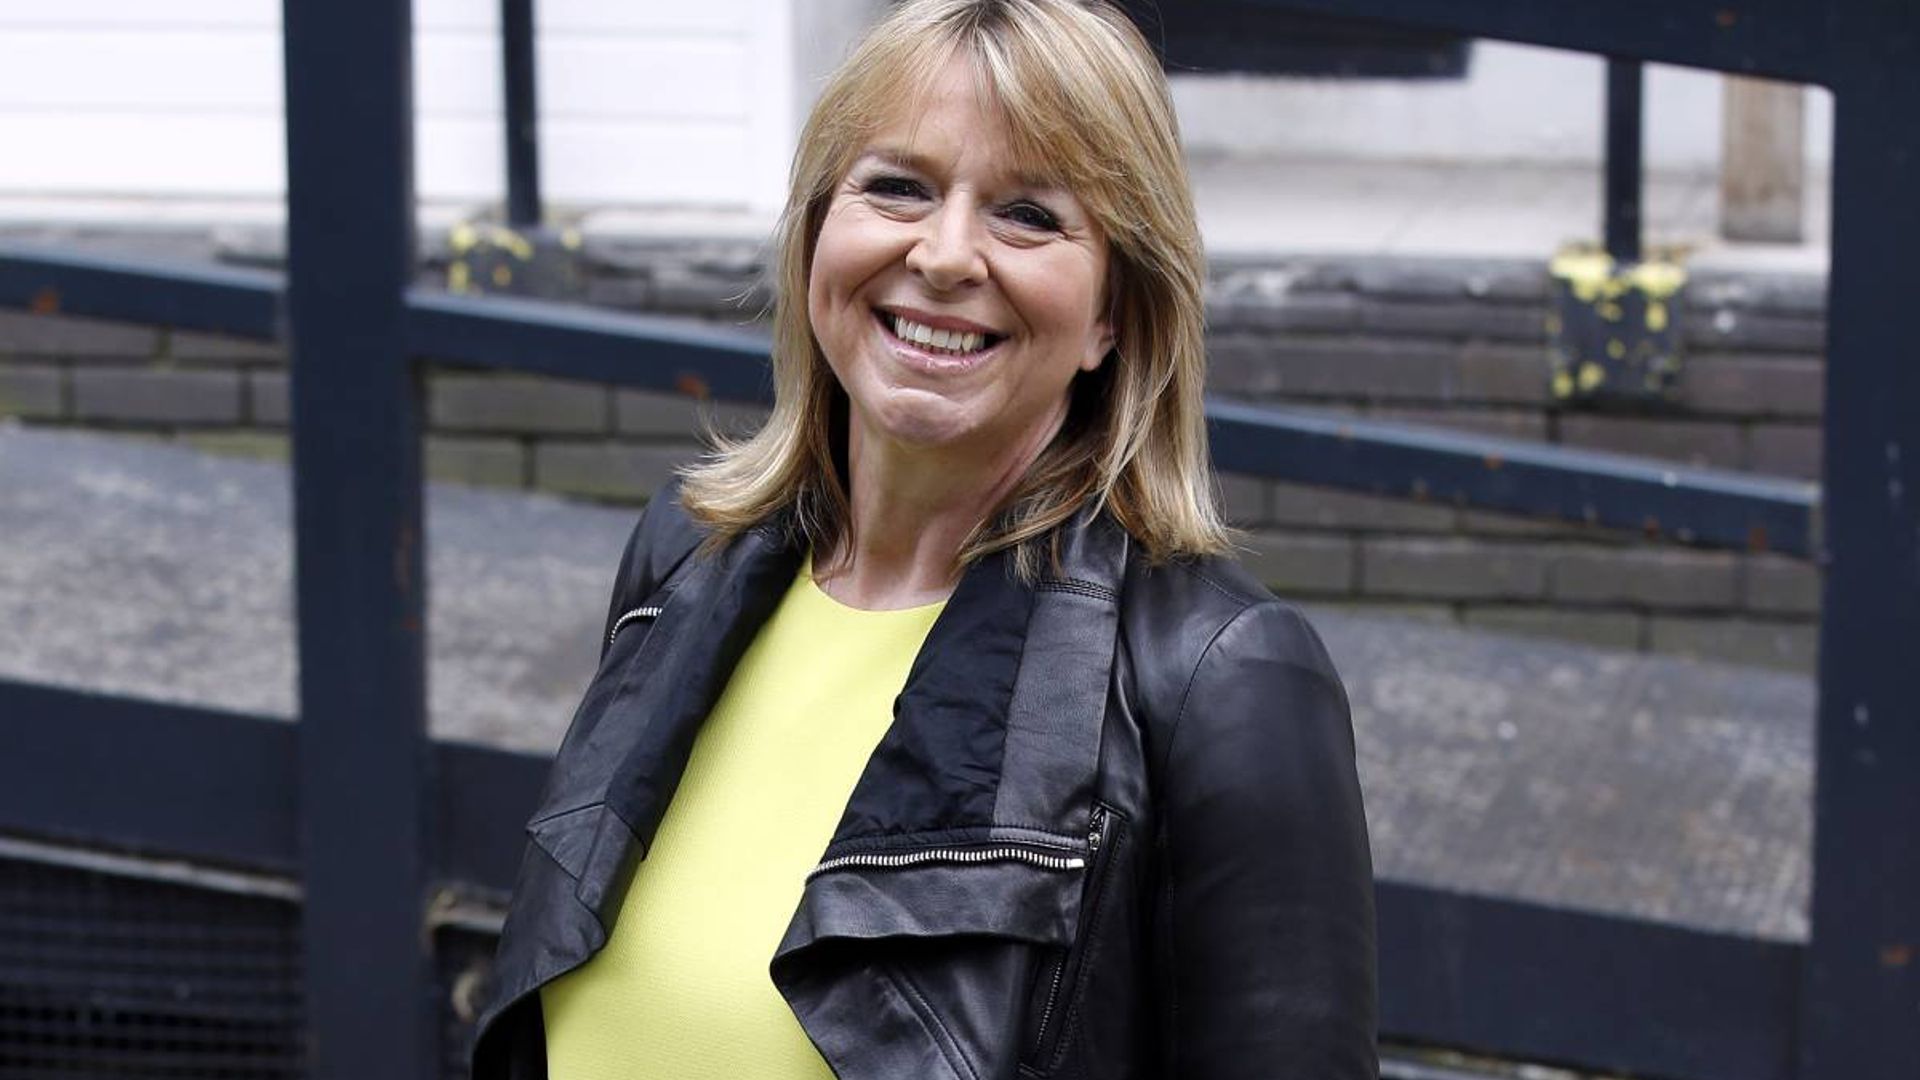 Fern Britton's fans urge her to look after herself as she admits to being under pressure